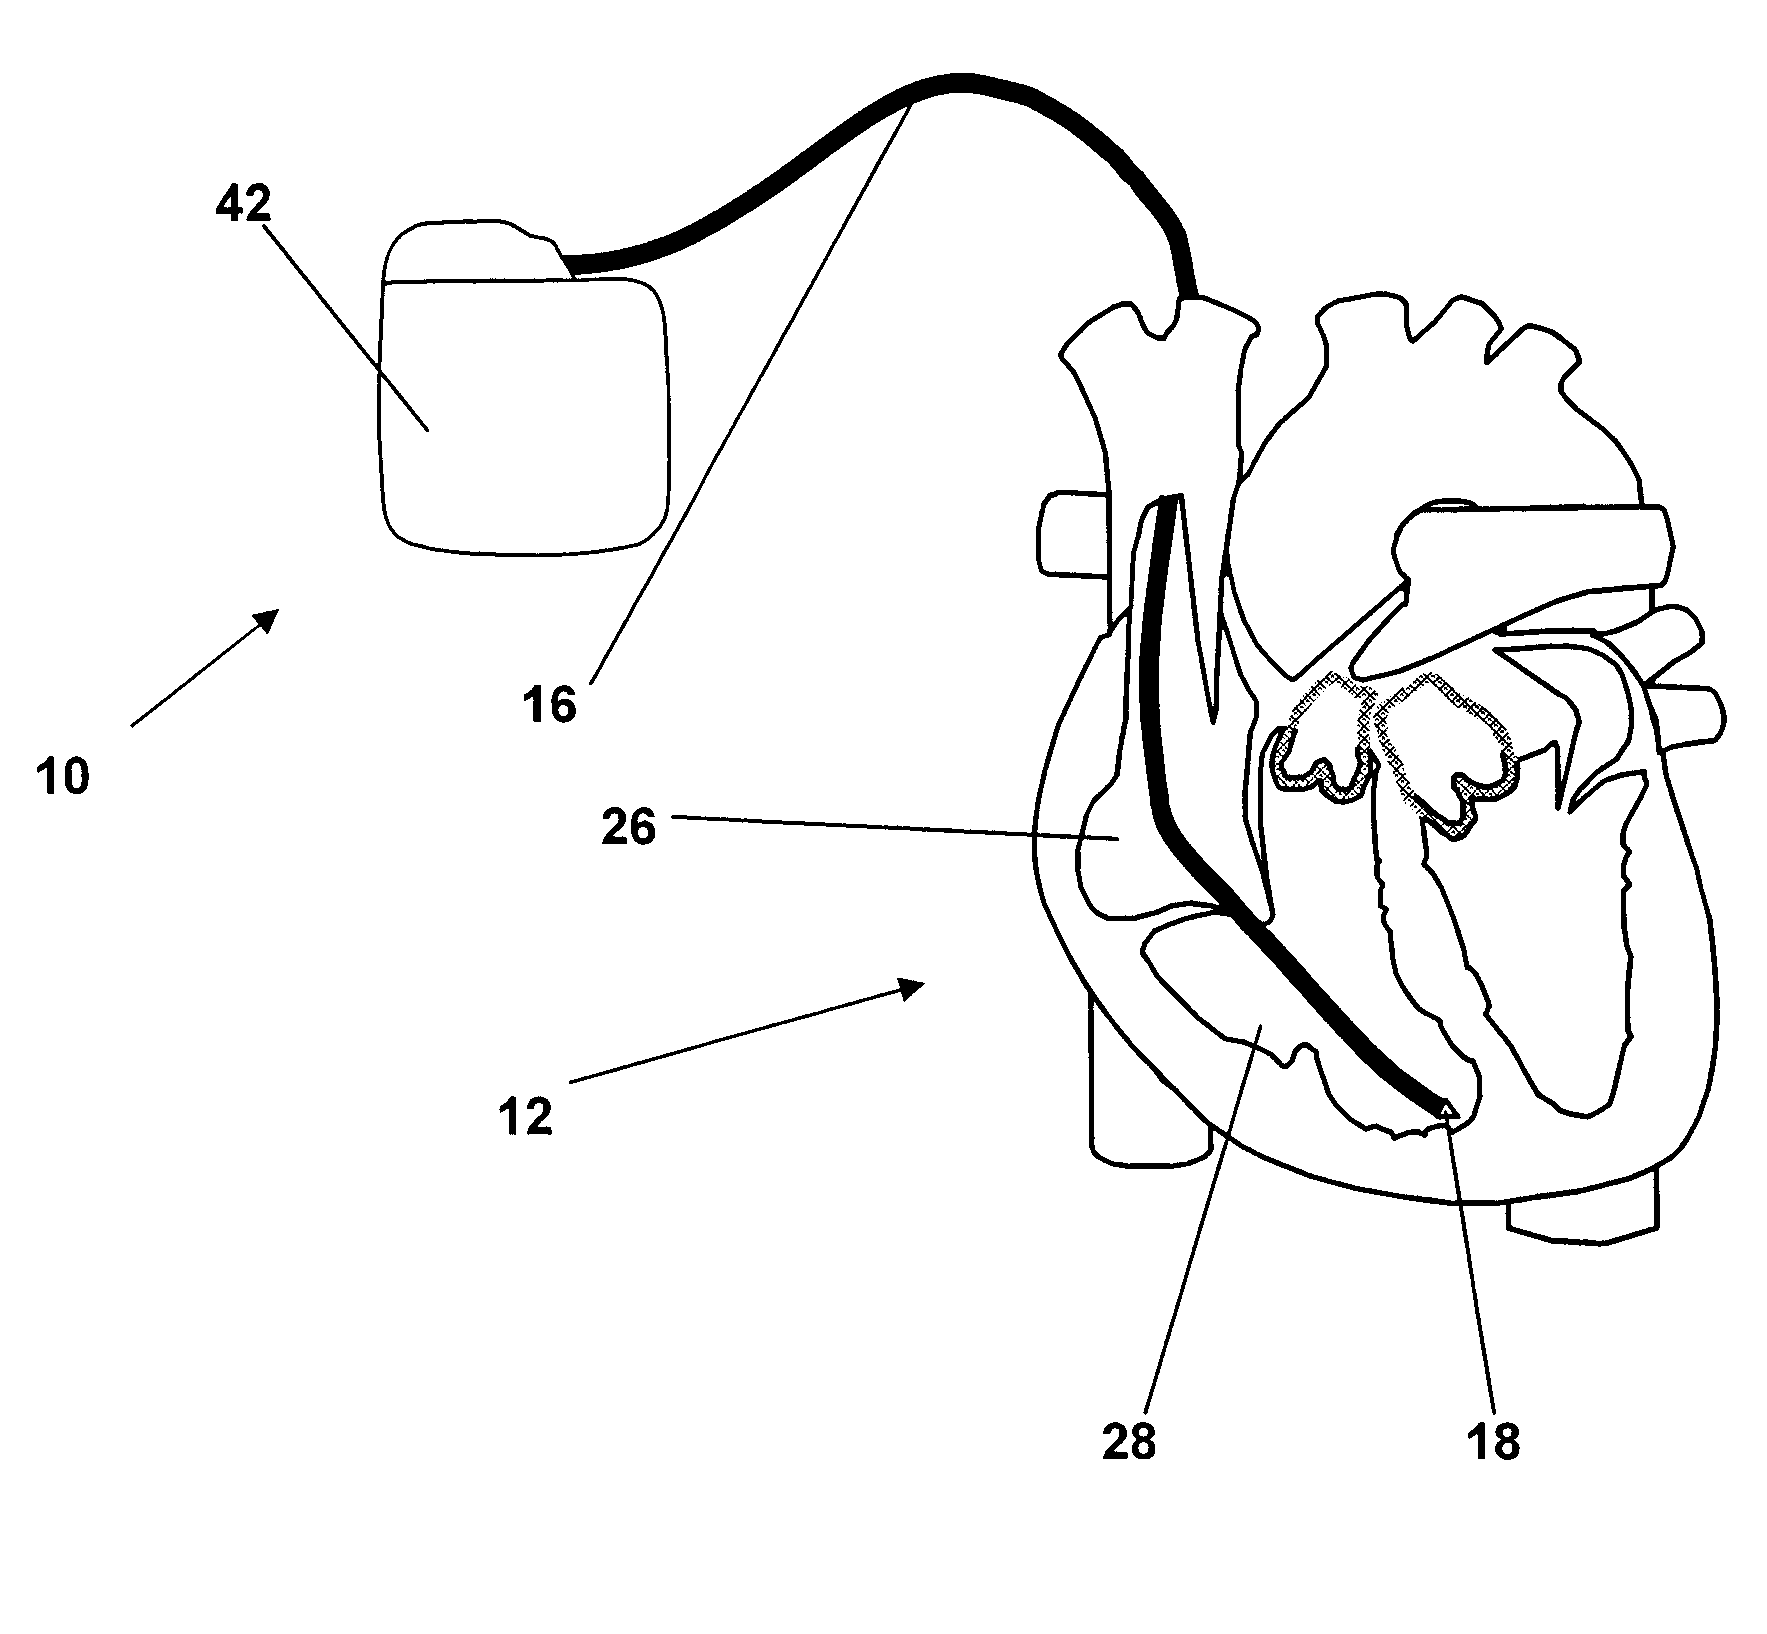 Monitoring system for sleep disordered breathing